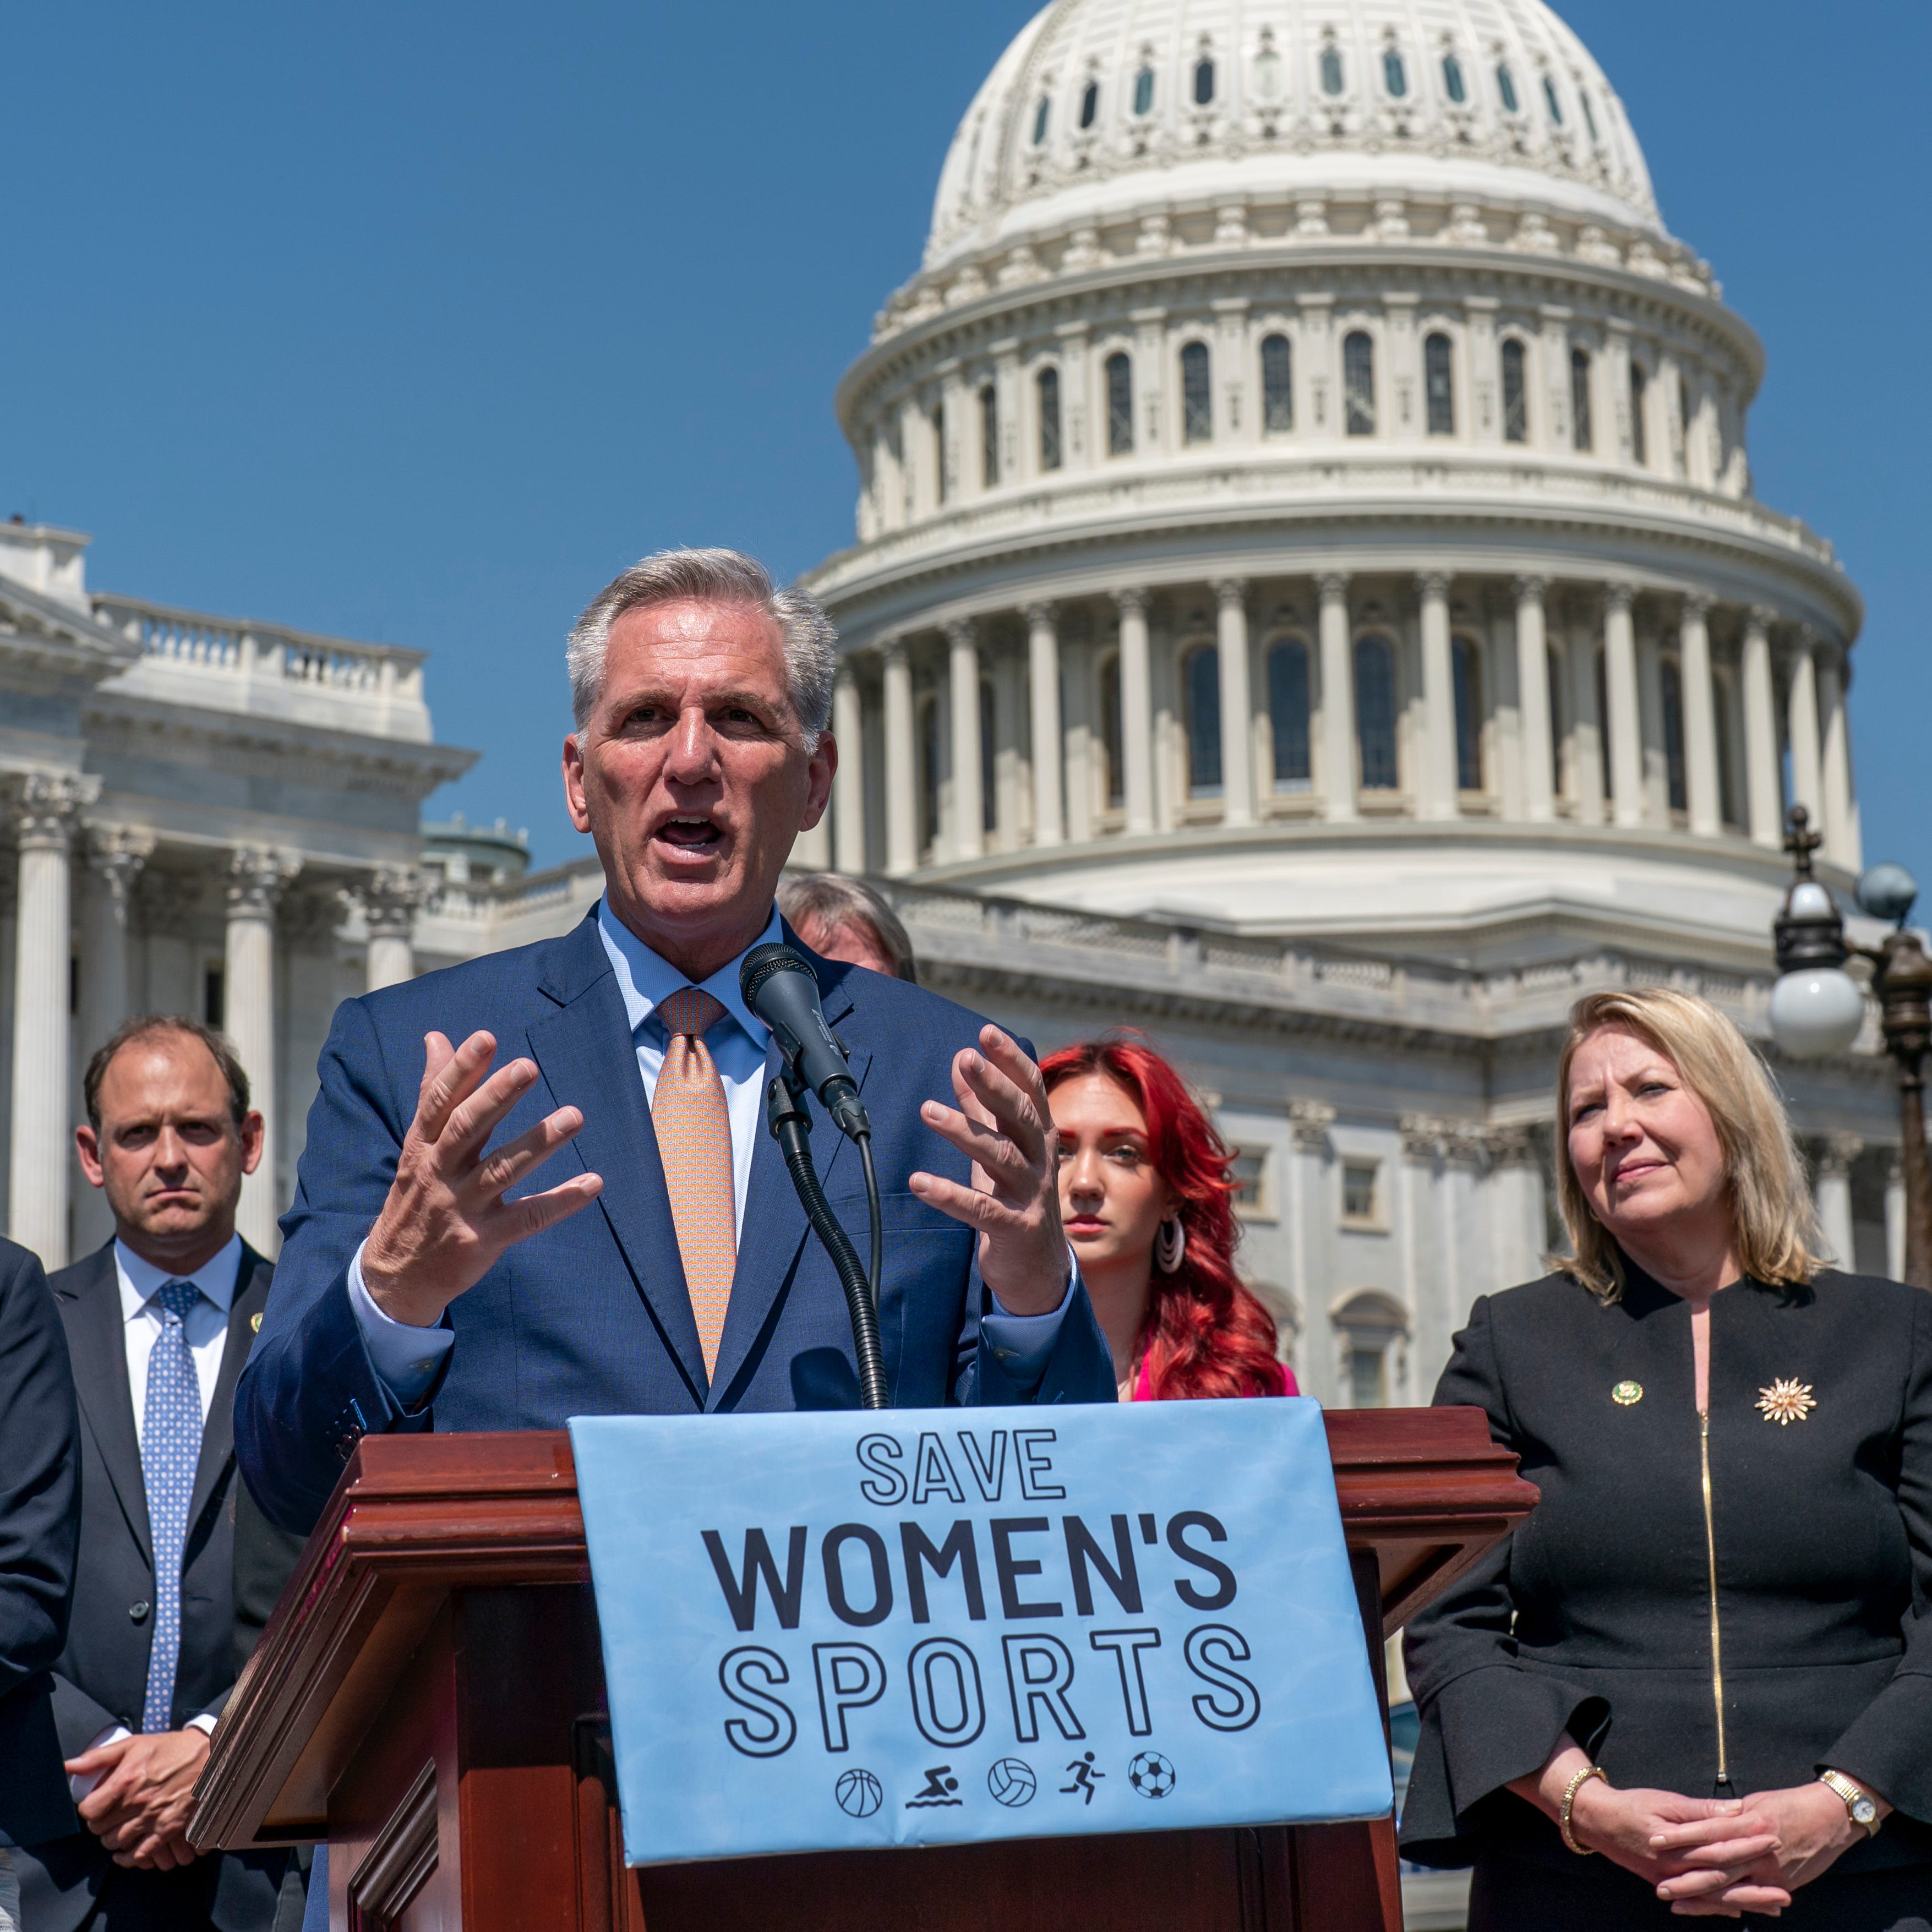 Speaker of the House Kevin McCarthy, R-Calif., speaks as he and House Republicans celebrate passage in the House of a bill that would bar federally supported schools and colleges from allowing transgender athletes whose biological sex assigned at birth was male to compete on girls or women's sports teams.